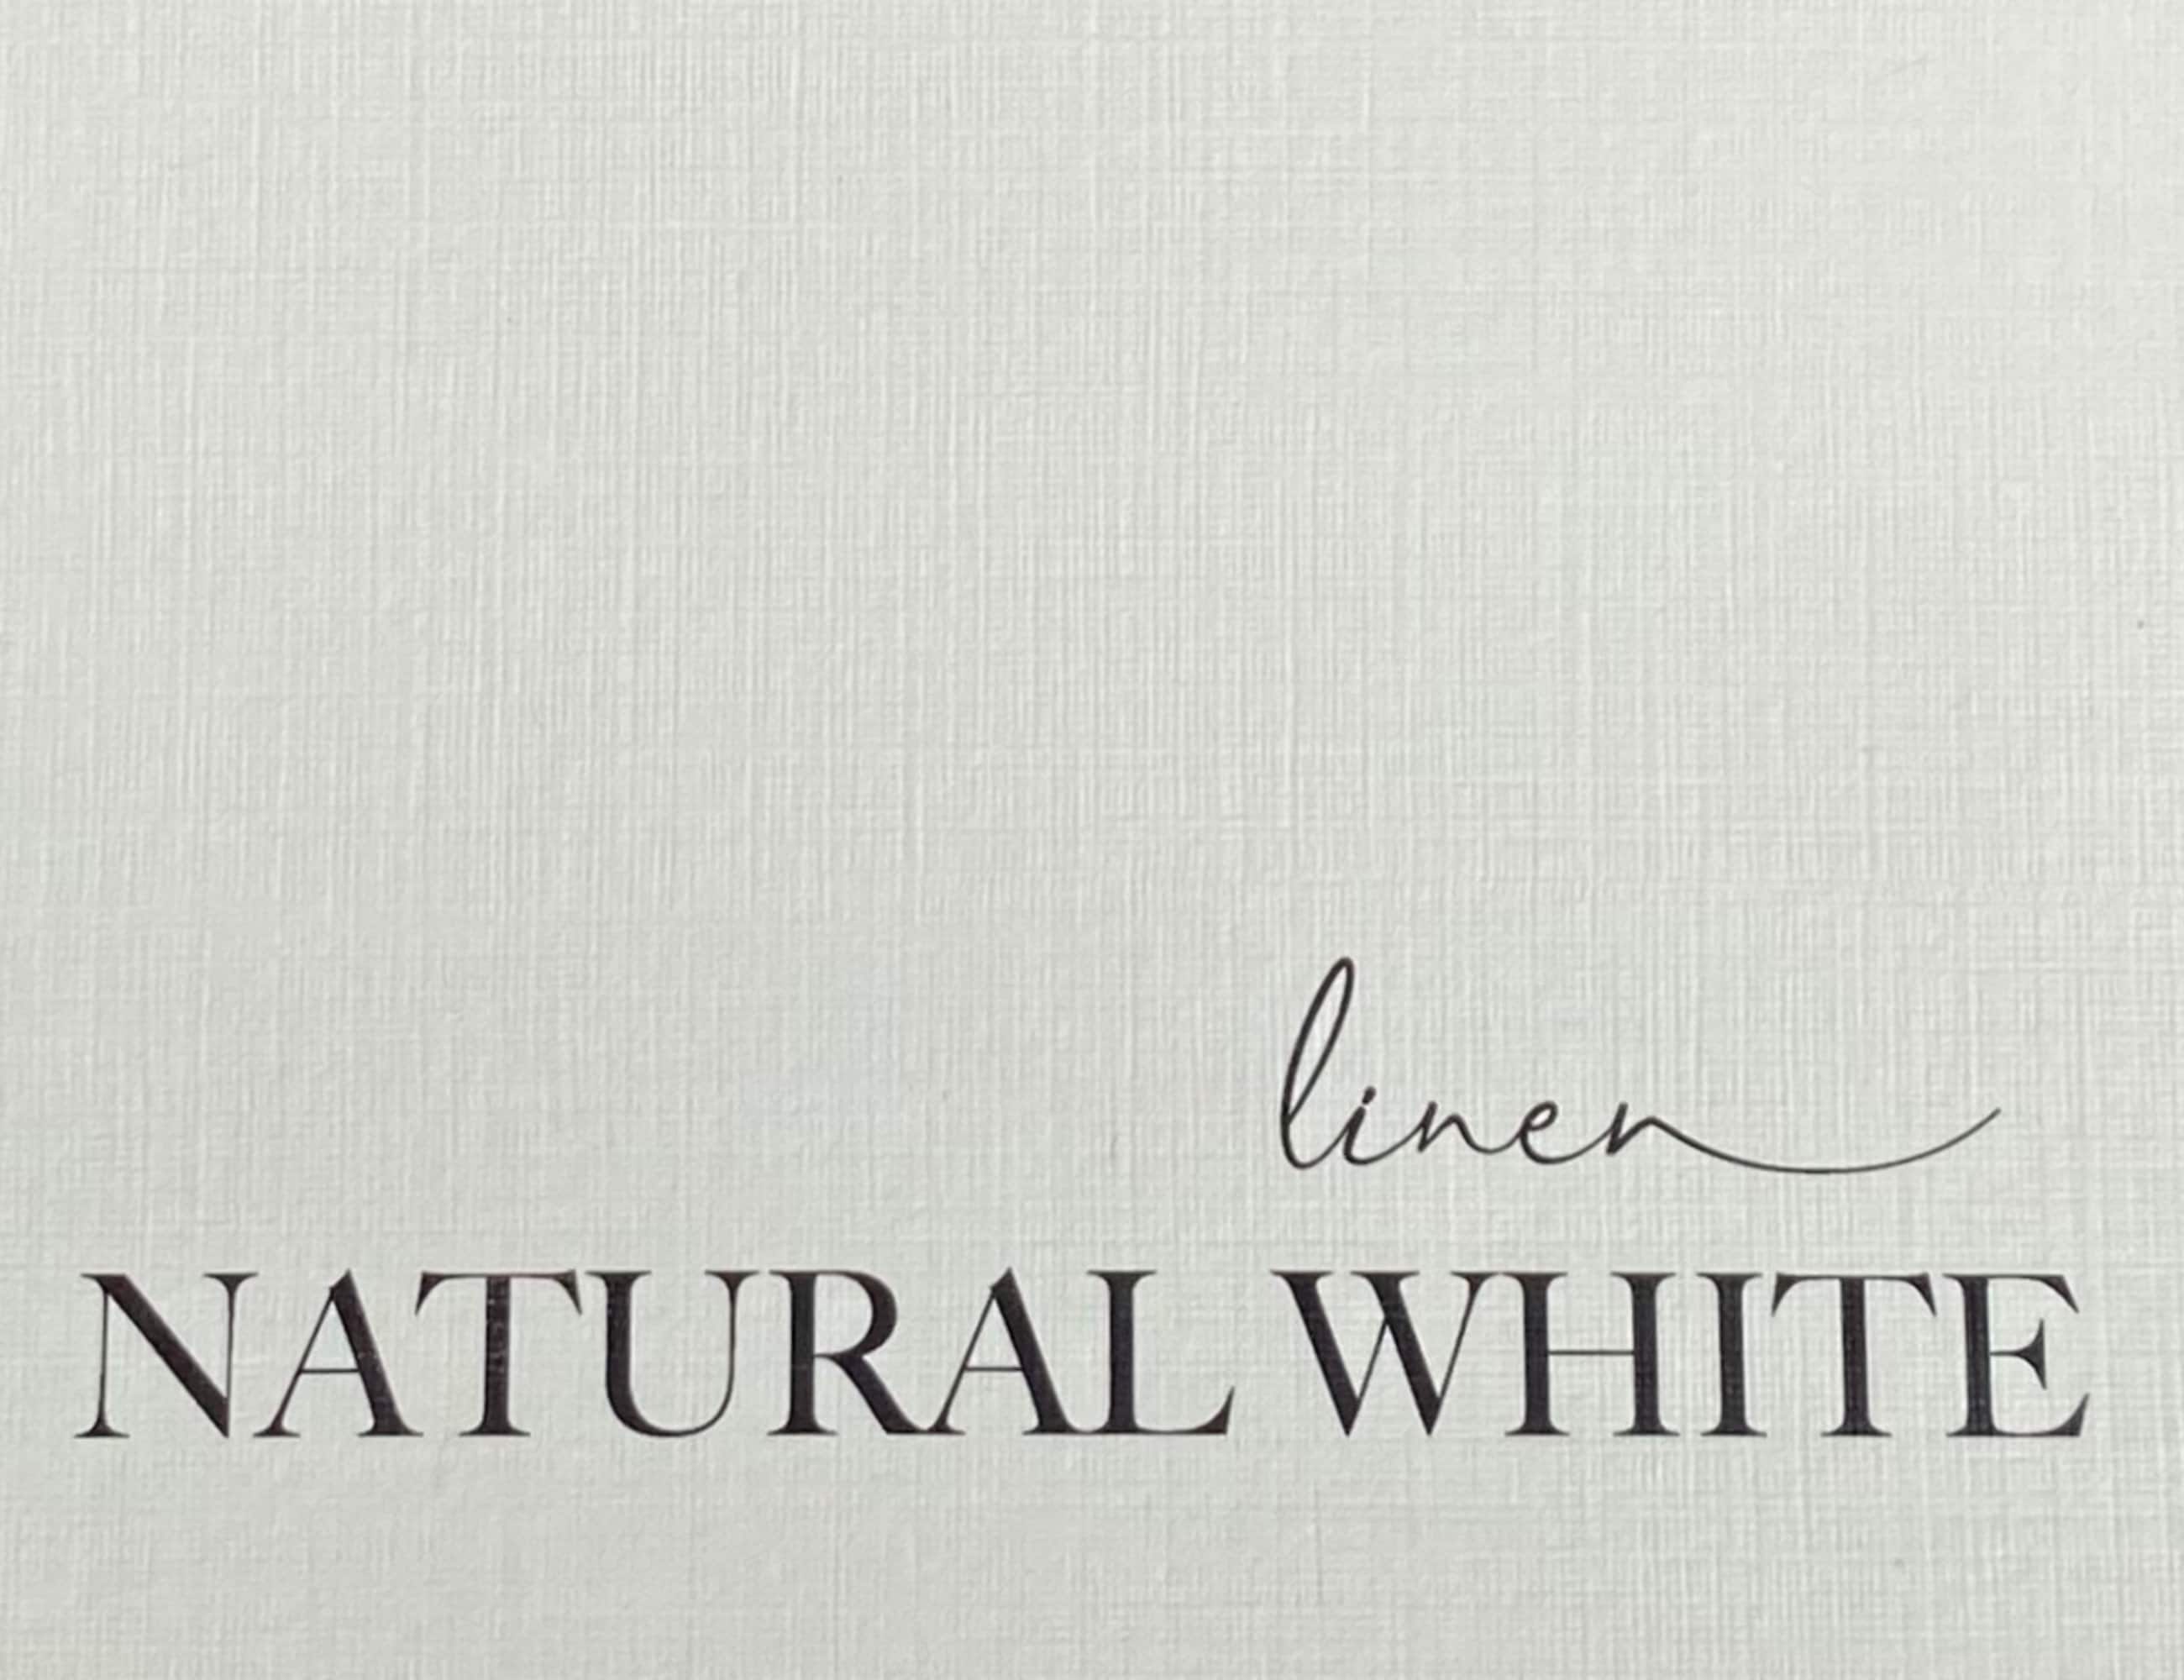 100 White Linen 80# Cover Paper Sheets - 4 X 6 (4X6 Inches) Photo